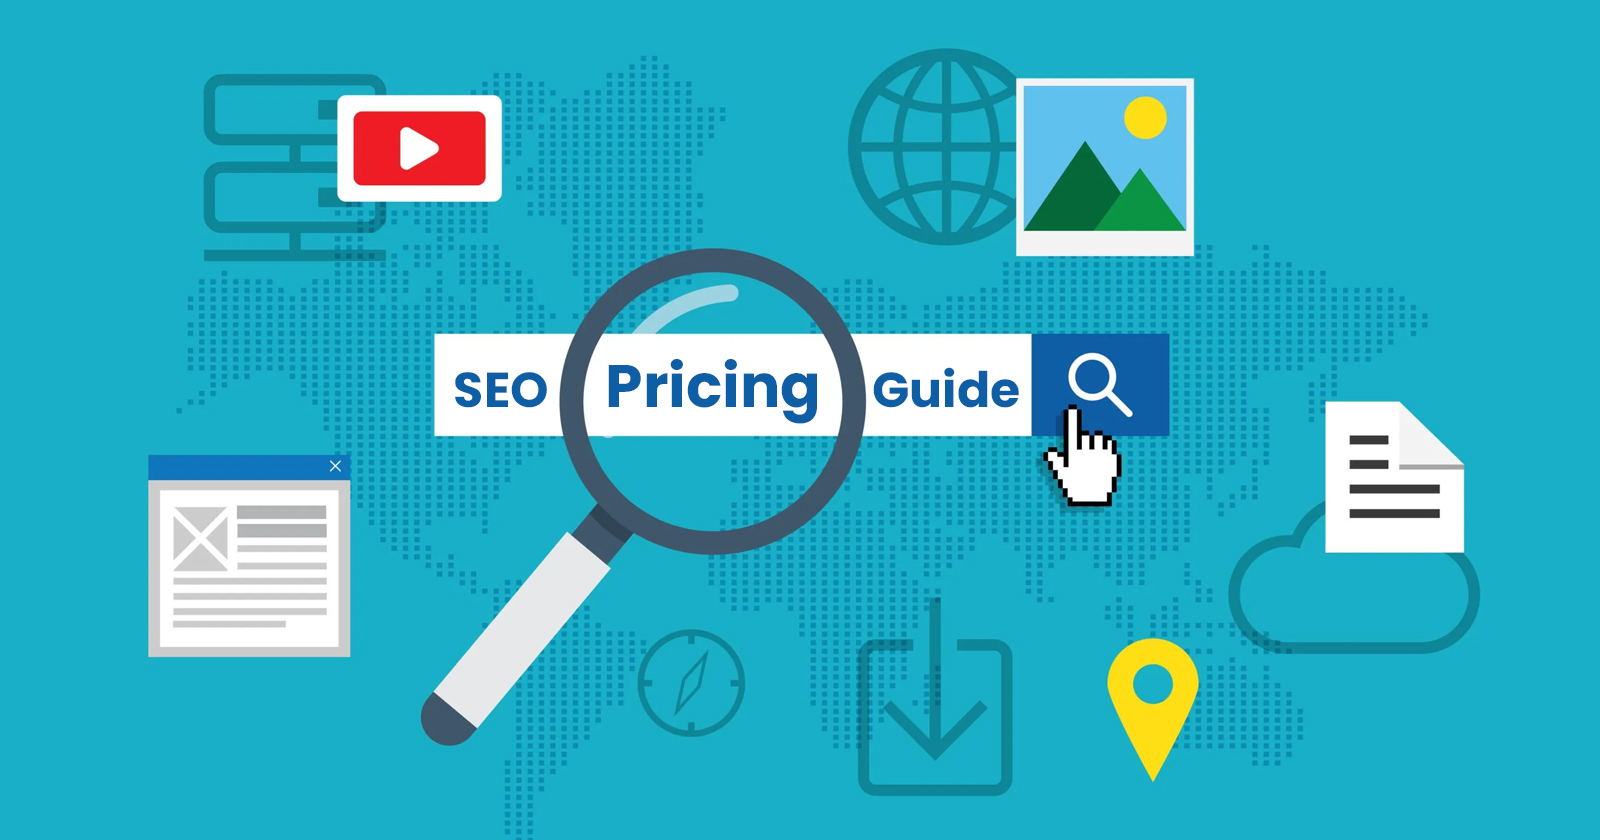 SEO Pricing - How Much Does SEO Cost